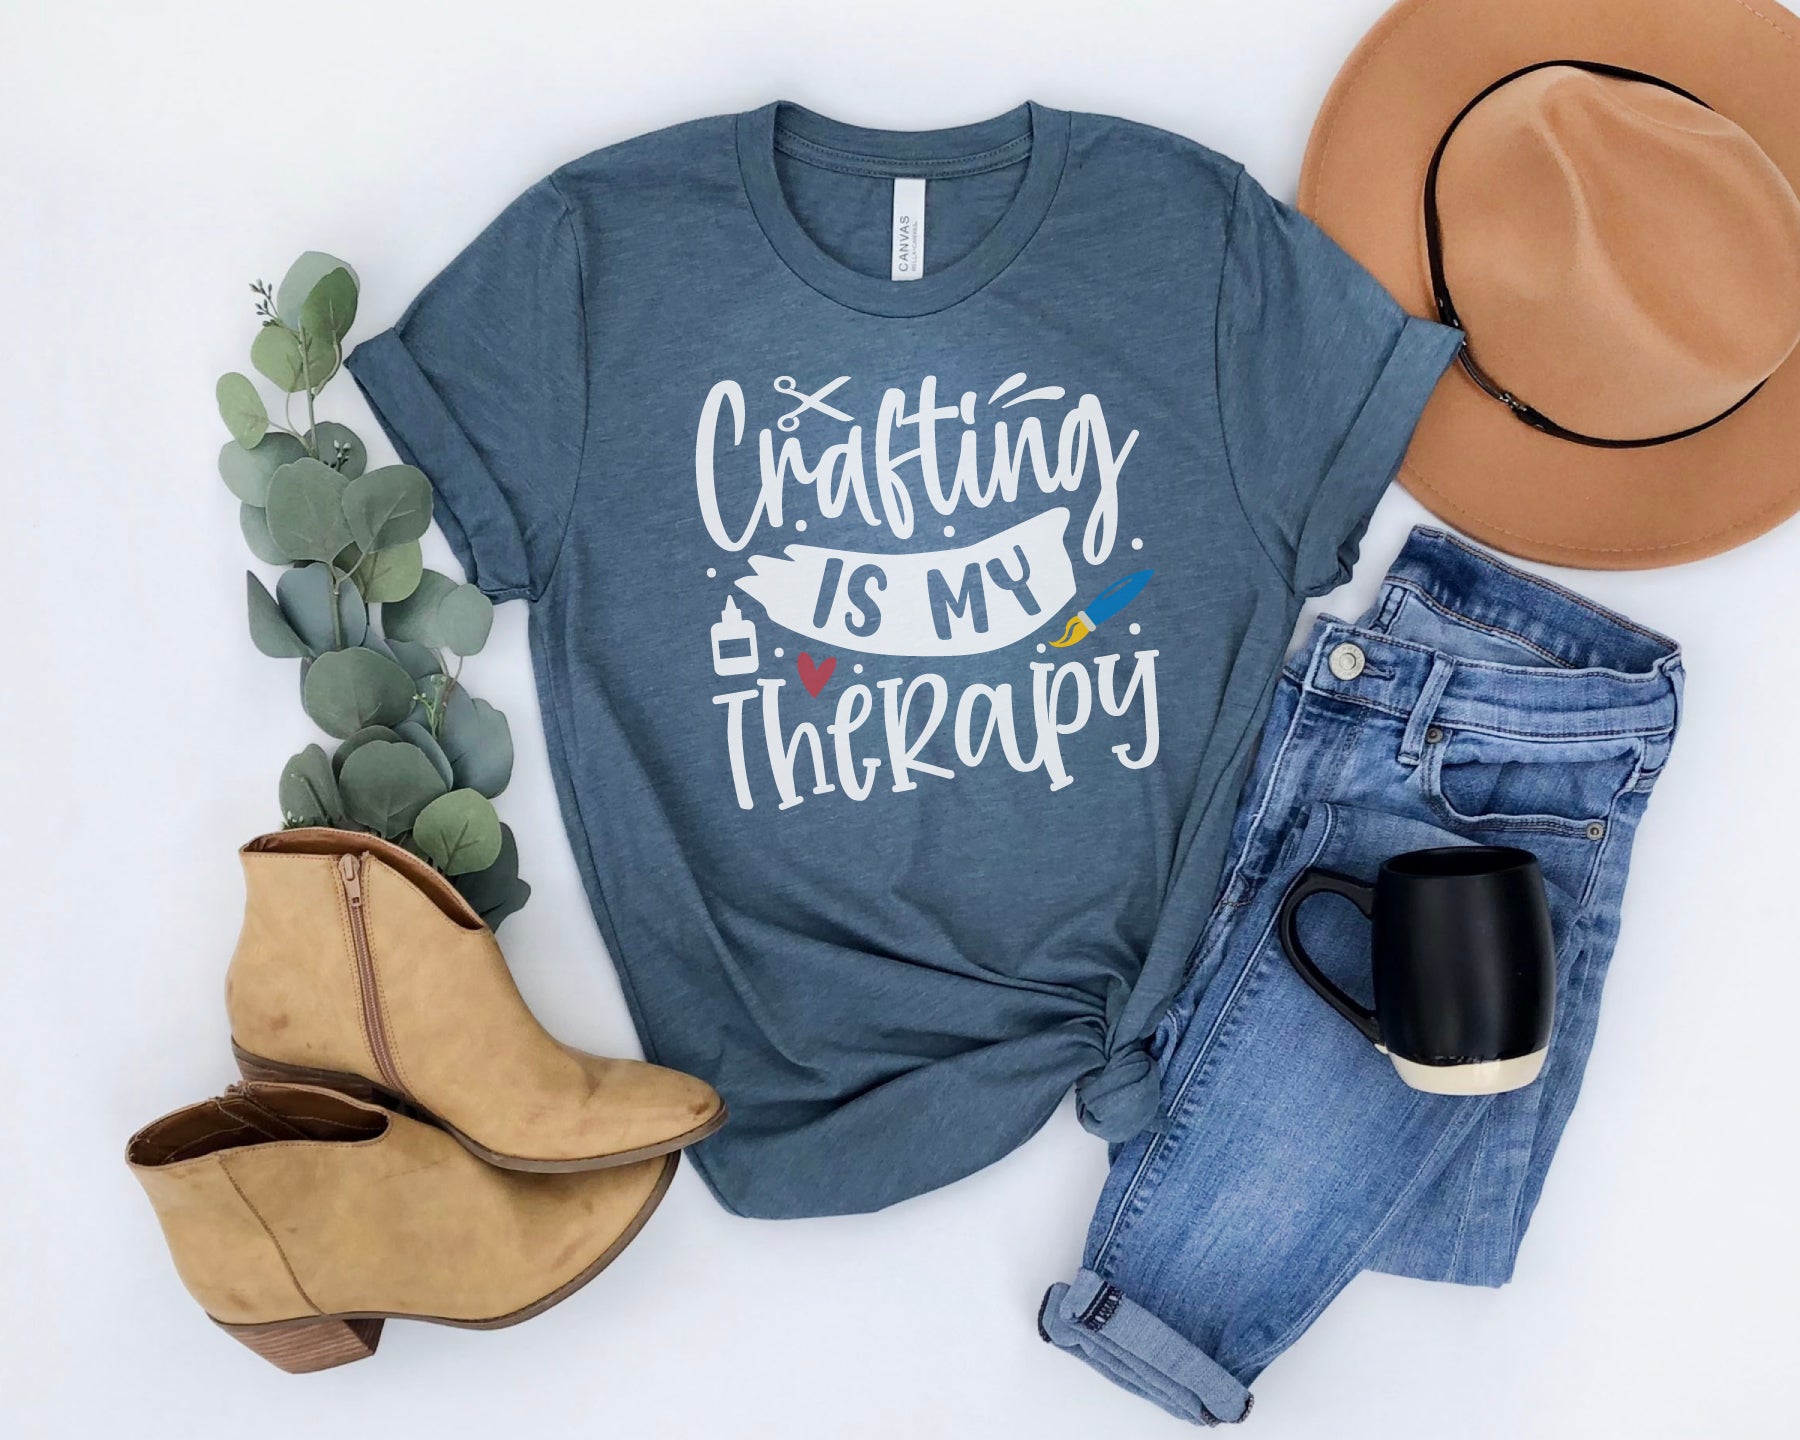 Crafting is My Therapy t-shirt in blue with jeans, hat, mug, and boots